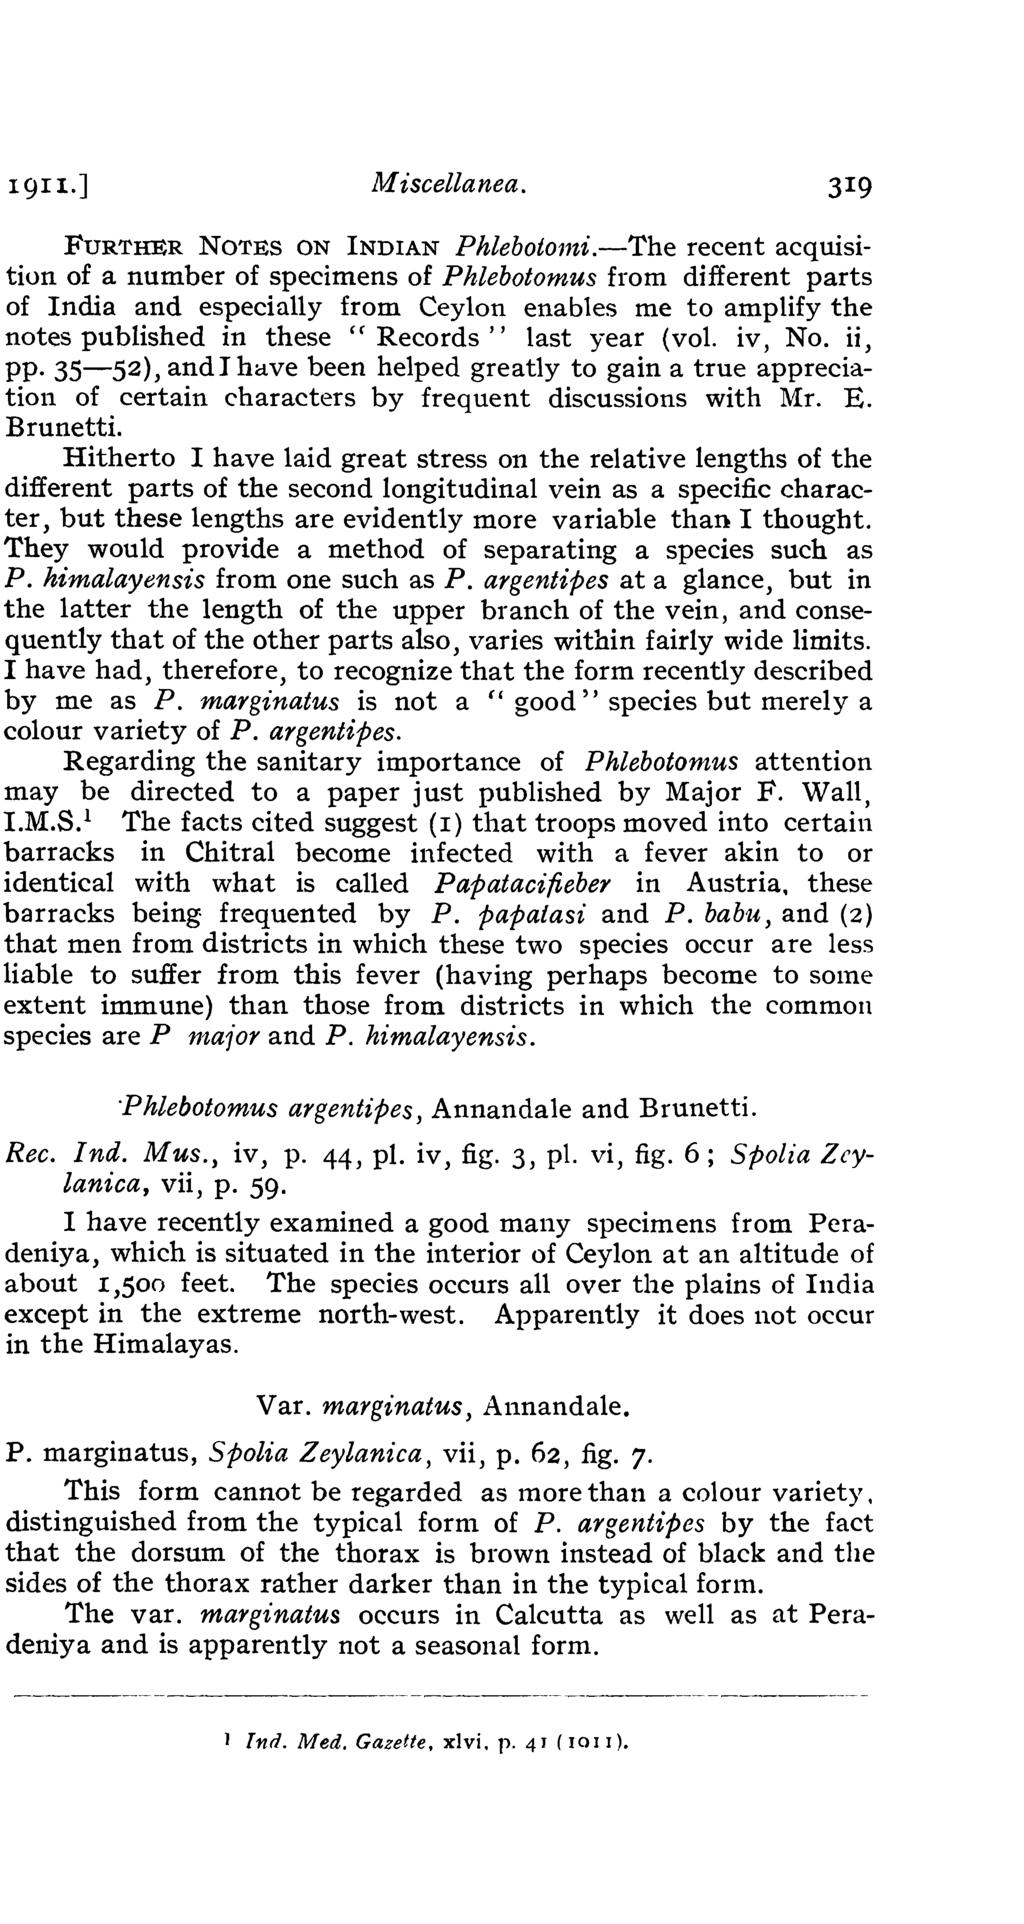 1911.] Miscellanea. FURTHER NOTES ON INDIAN Phlebotol1ti.